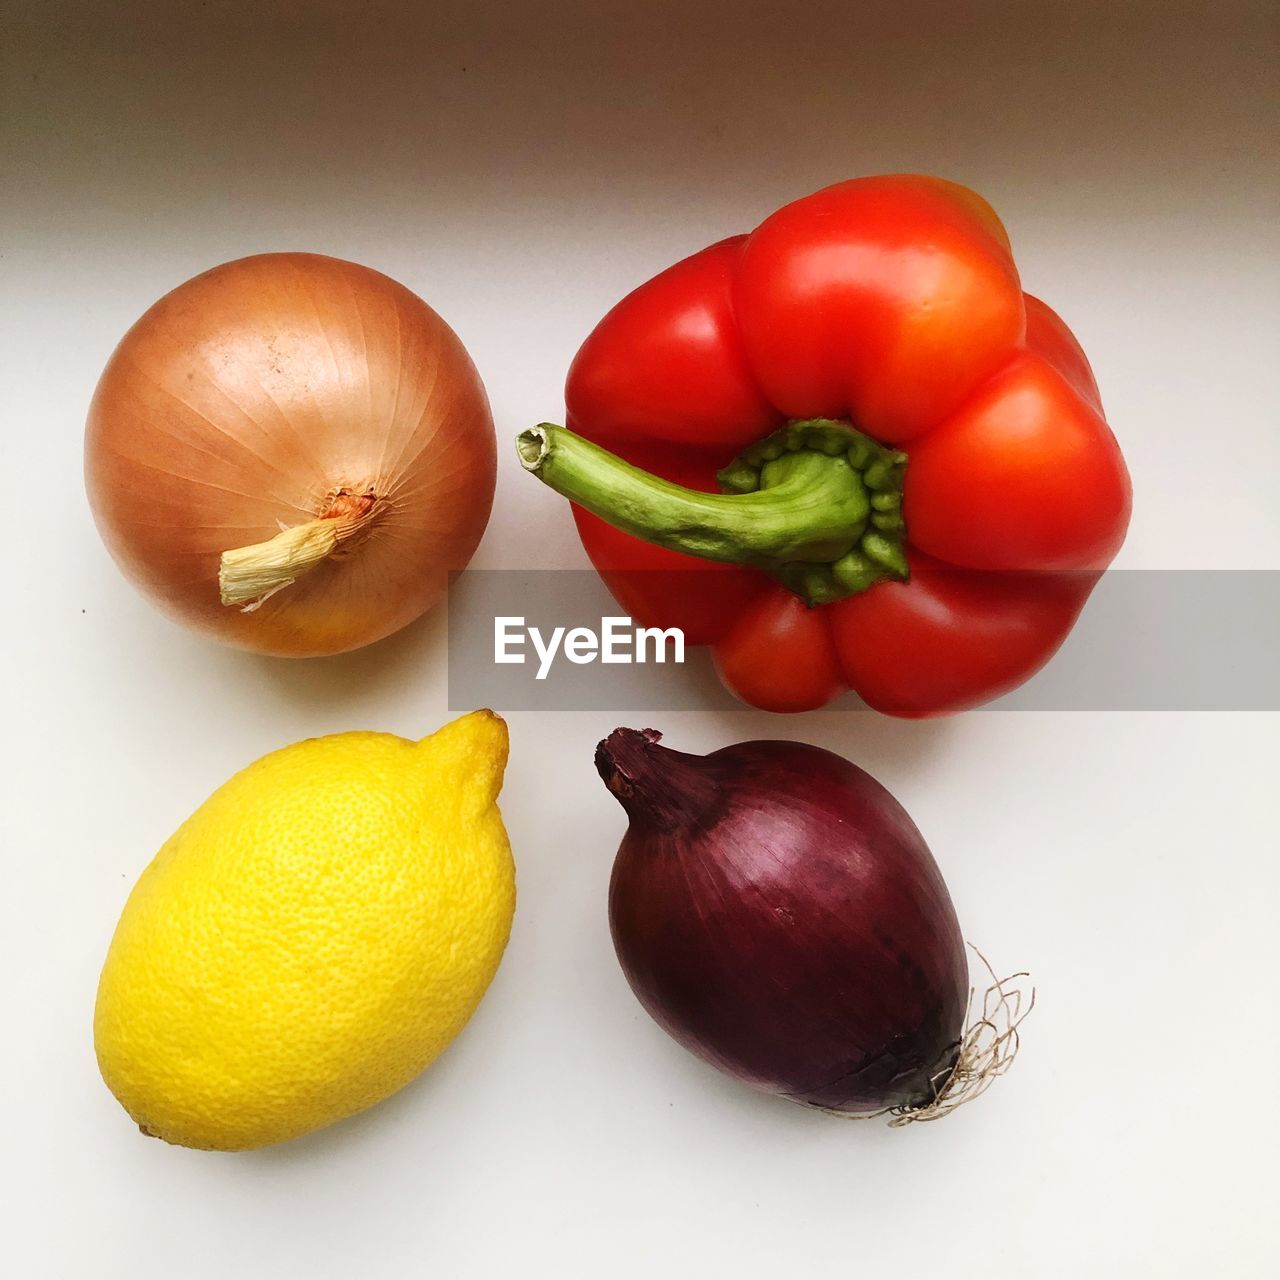 CLOSE-UP OF FRUITS AND TOMATOES ON WHITE BACKGROUND